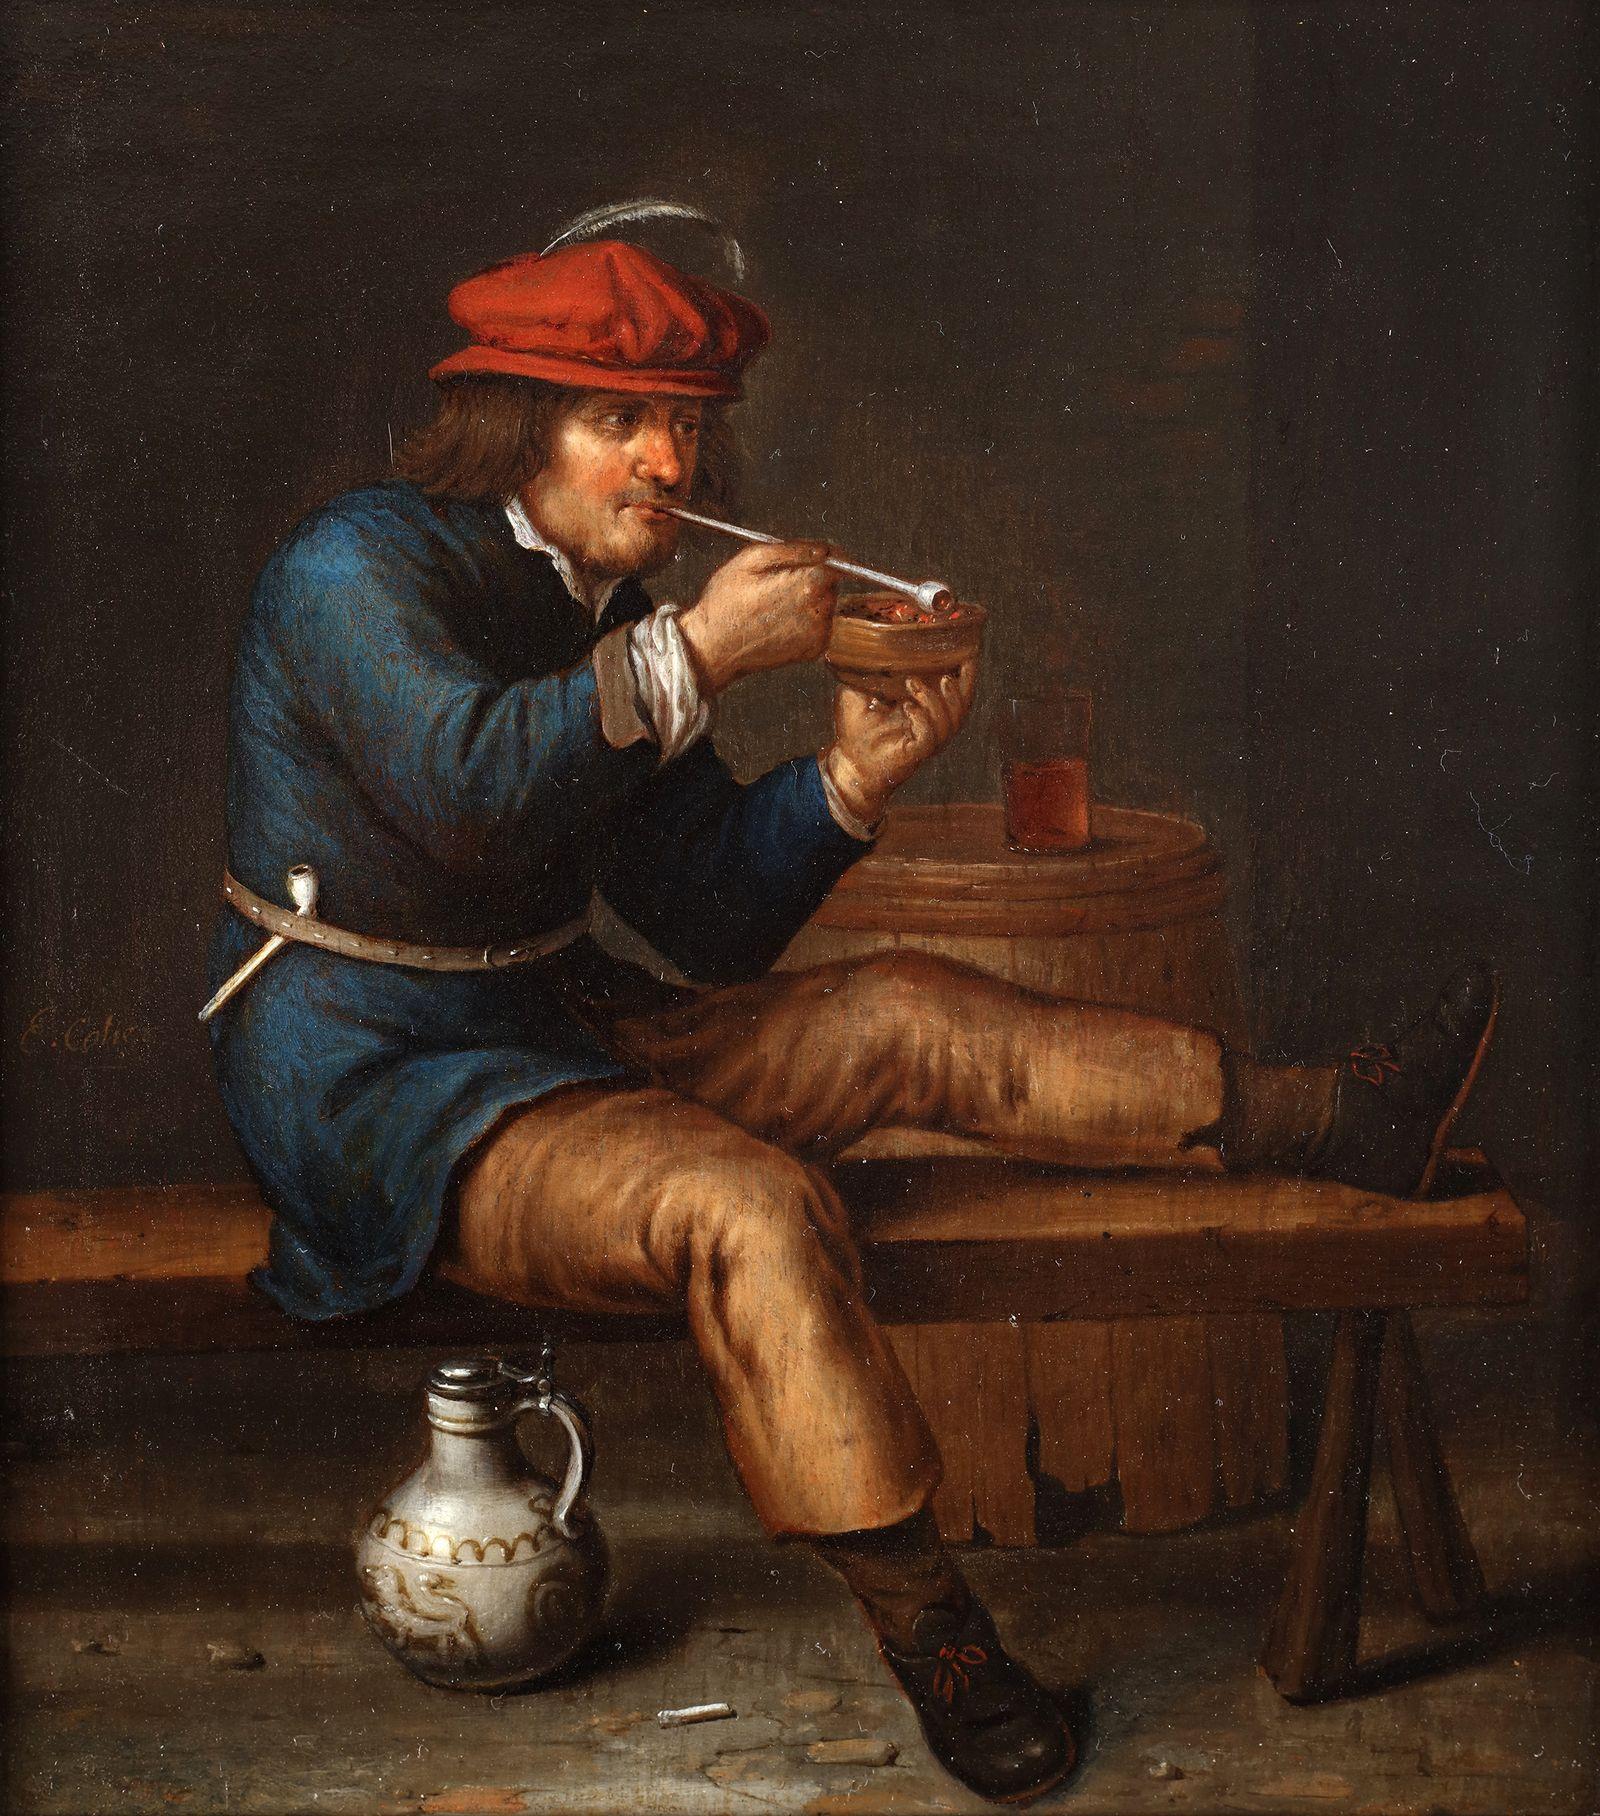 The Pipesmoker - Painting by Edward Collier 